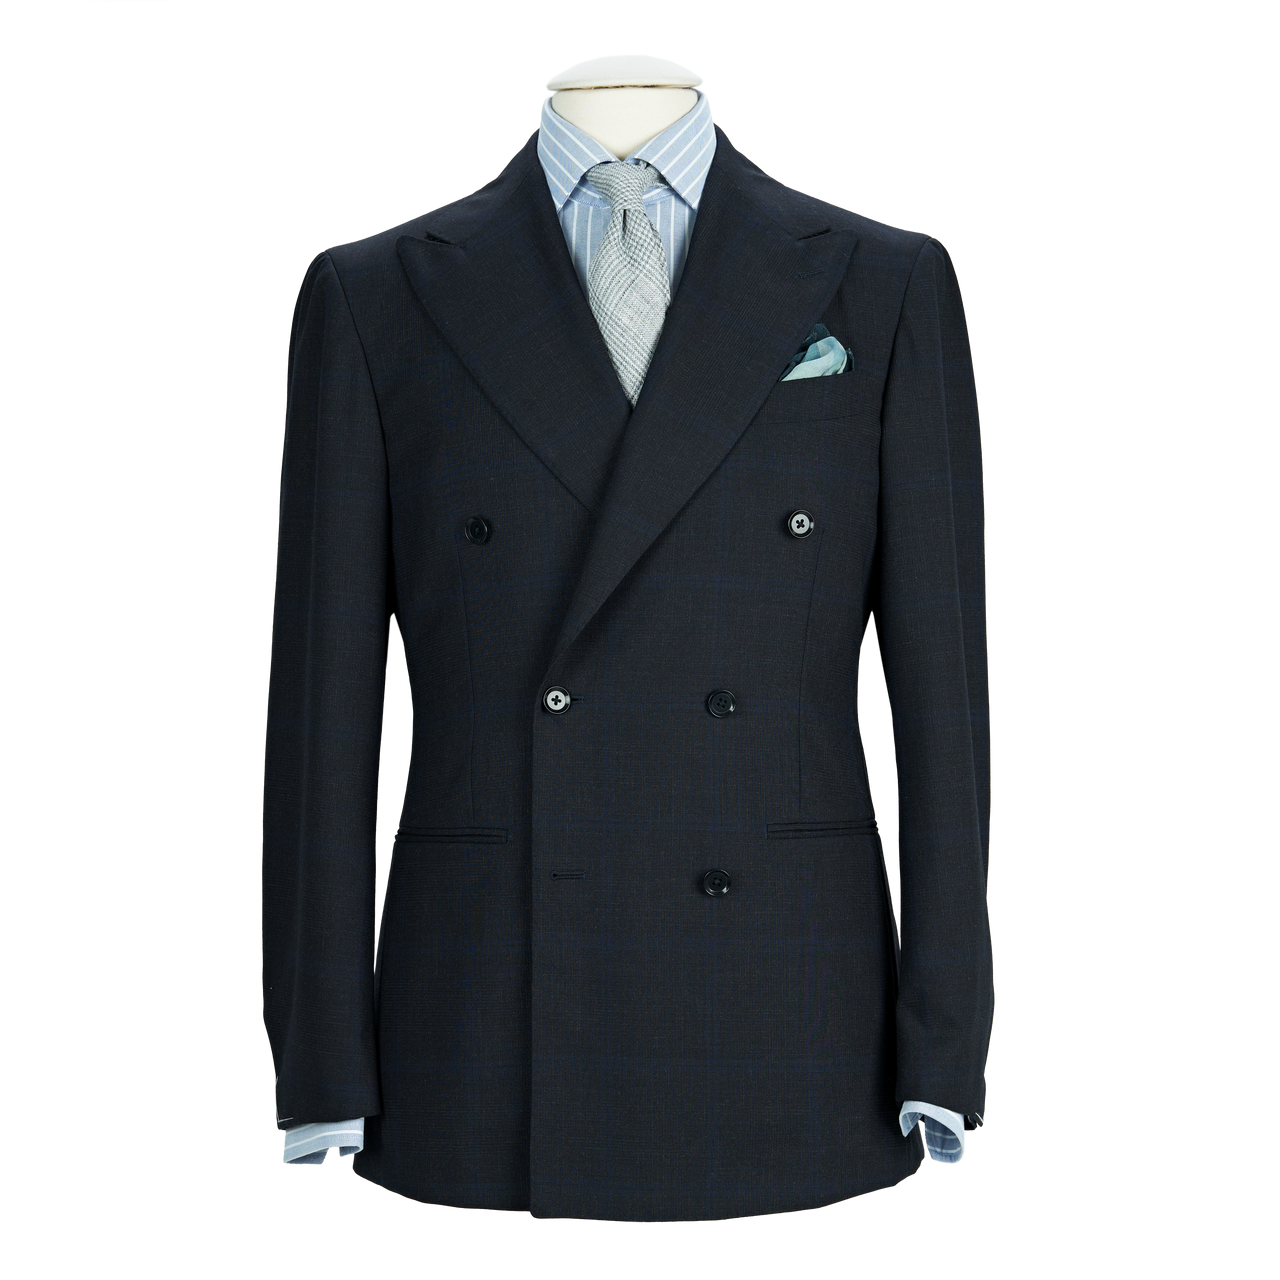 Ring Jacket Double Breasted Suit 268E-S178 in Charcoal Grey with Navy Overcheck Wool